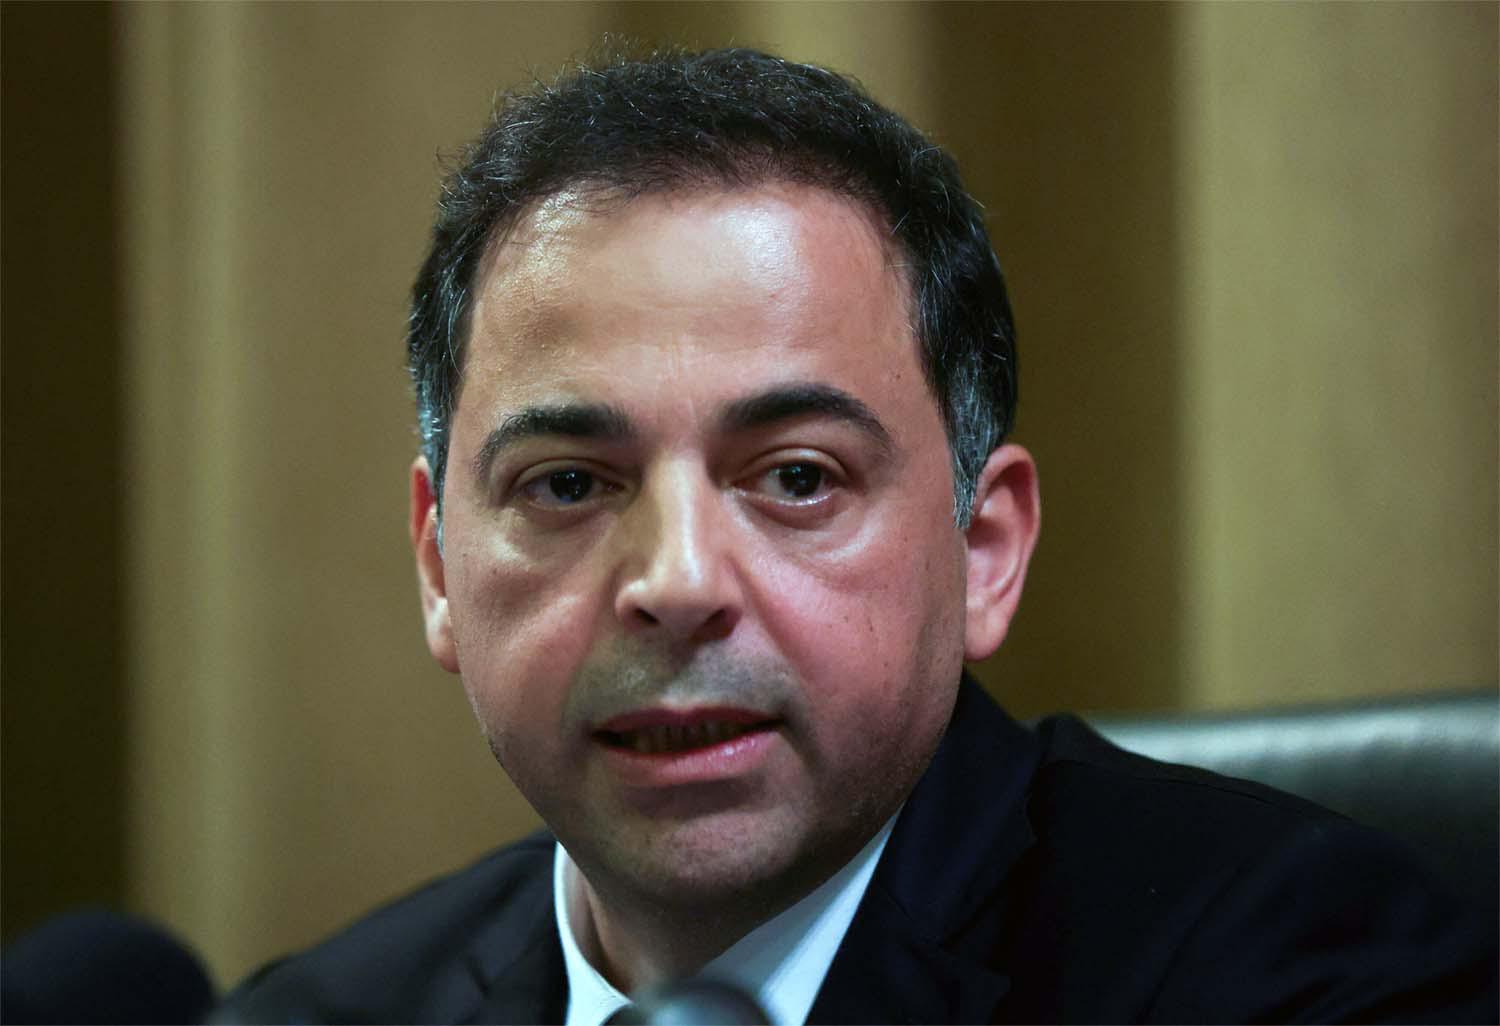 Wassim Mansouri, first vice governor of Lebanon's central bank